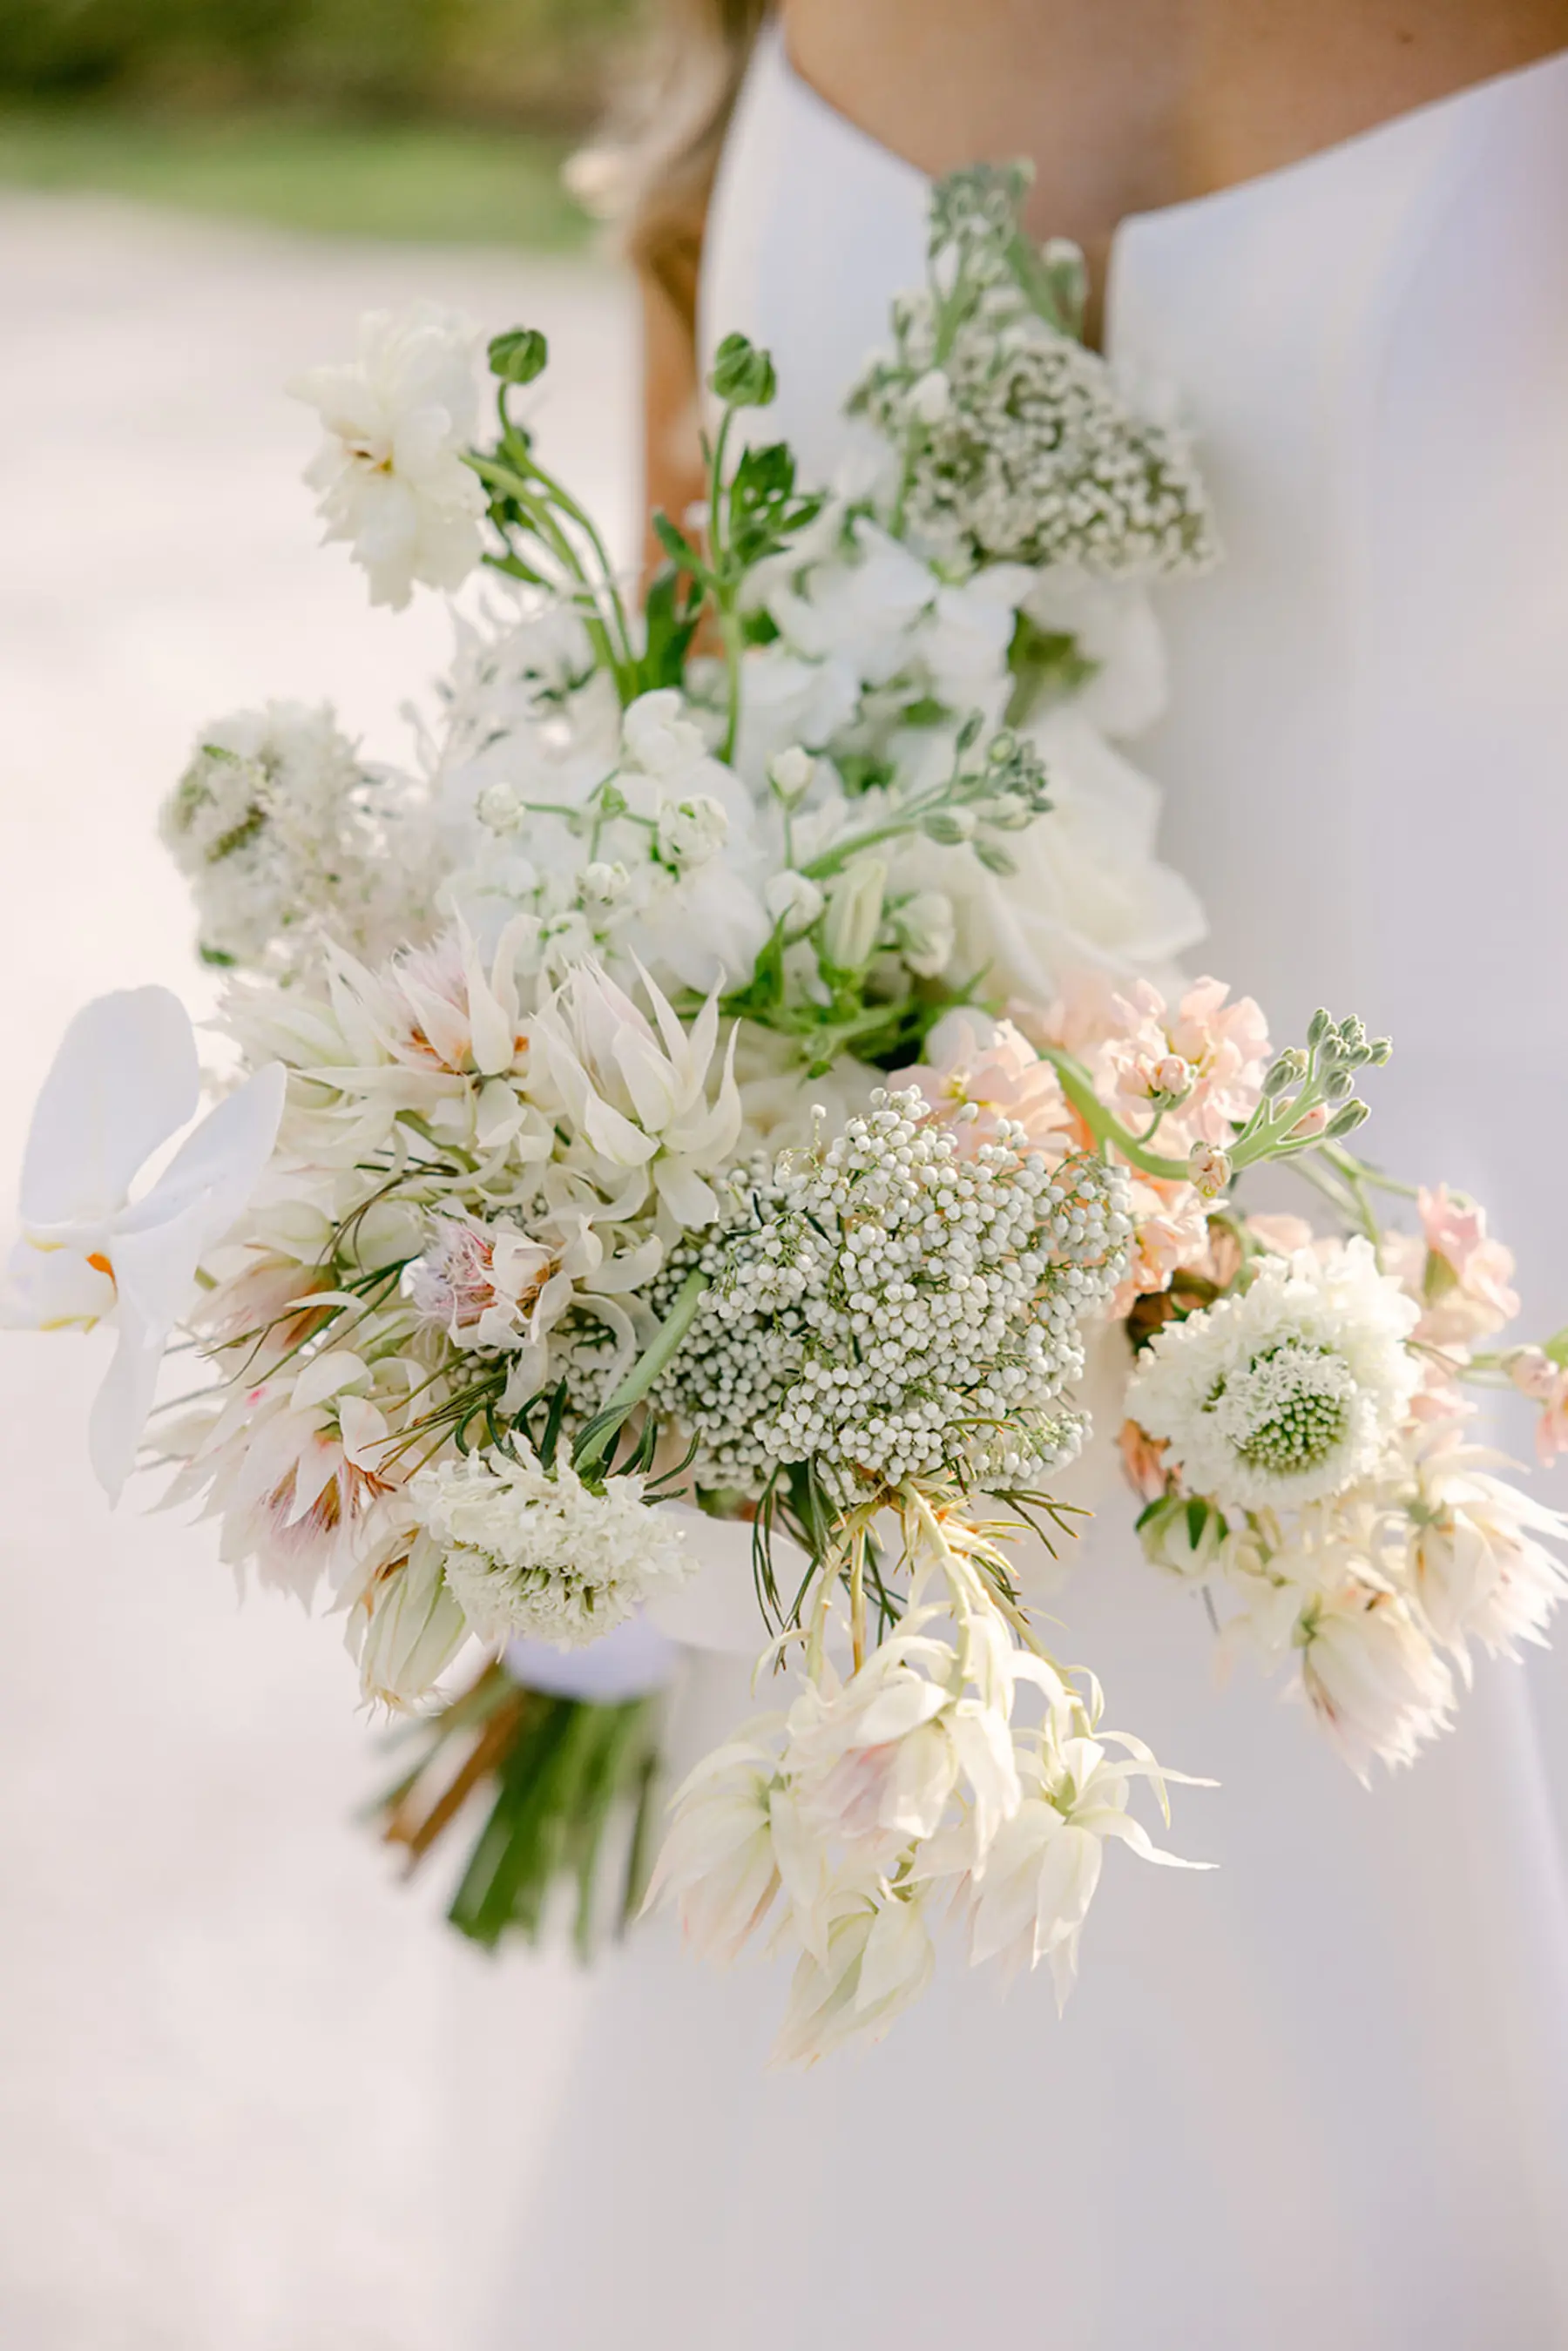 Pink Carnations and White Orchids Classic Bridal Wedding Bouquet Ideas